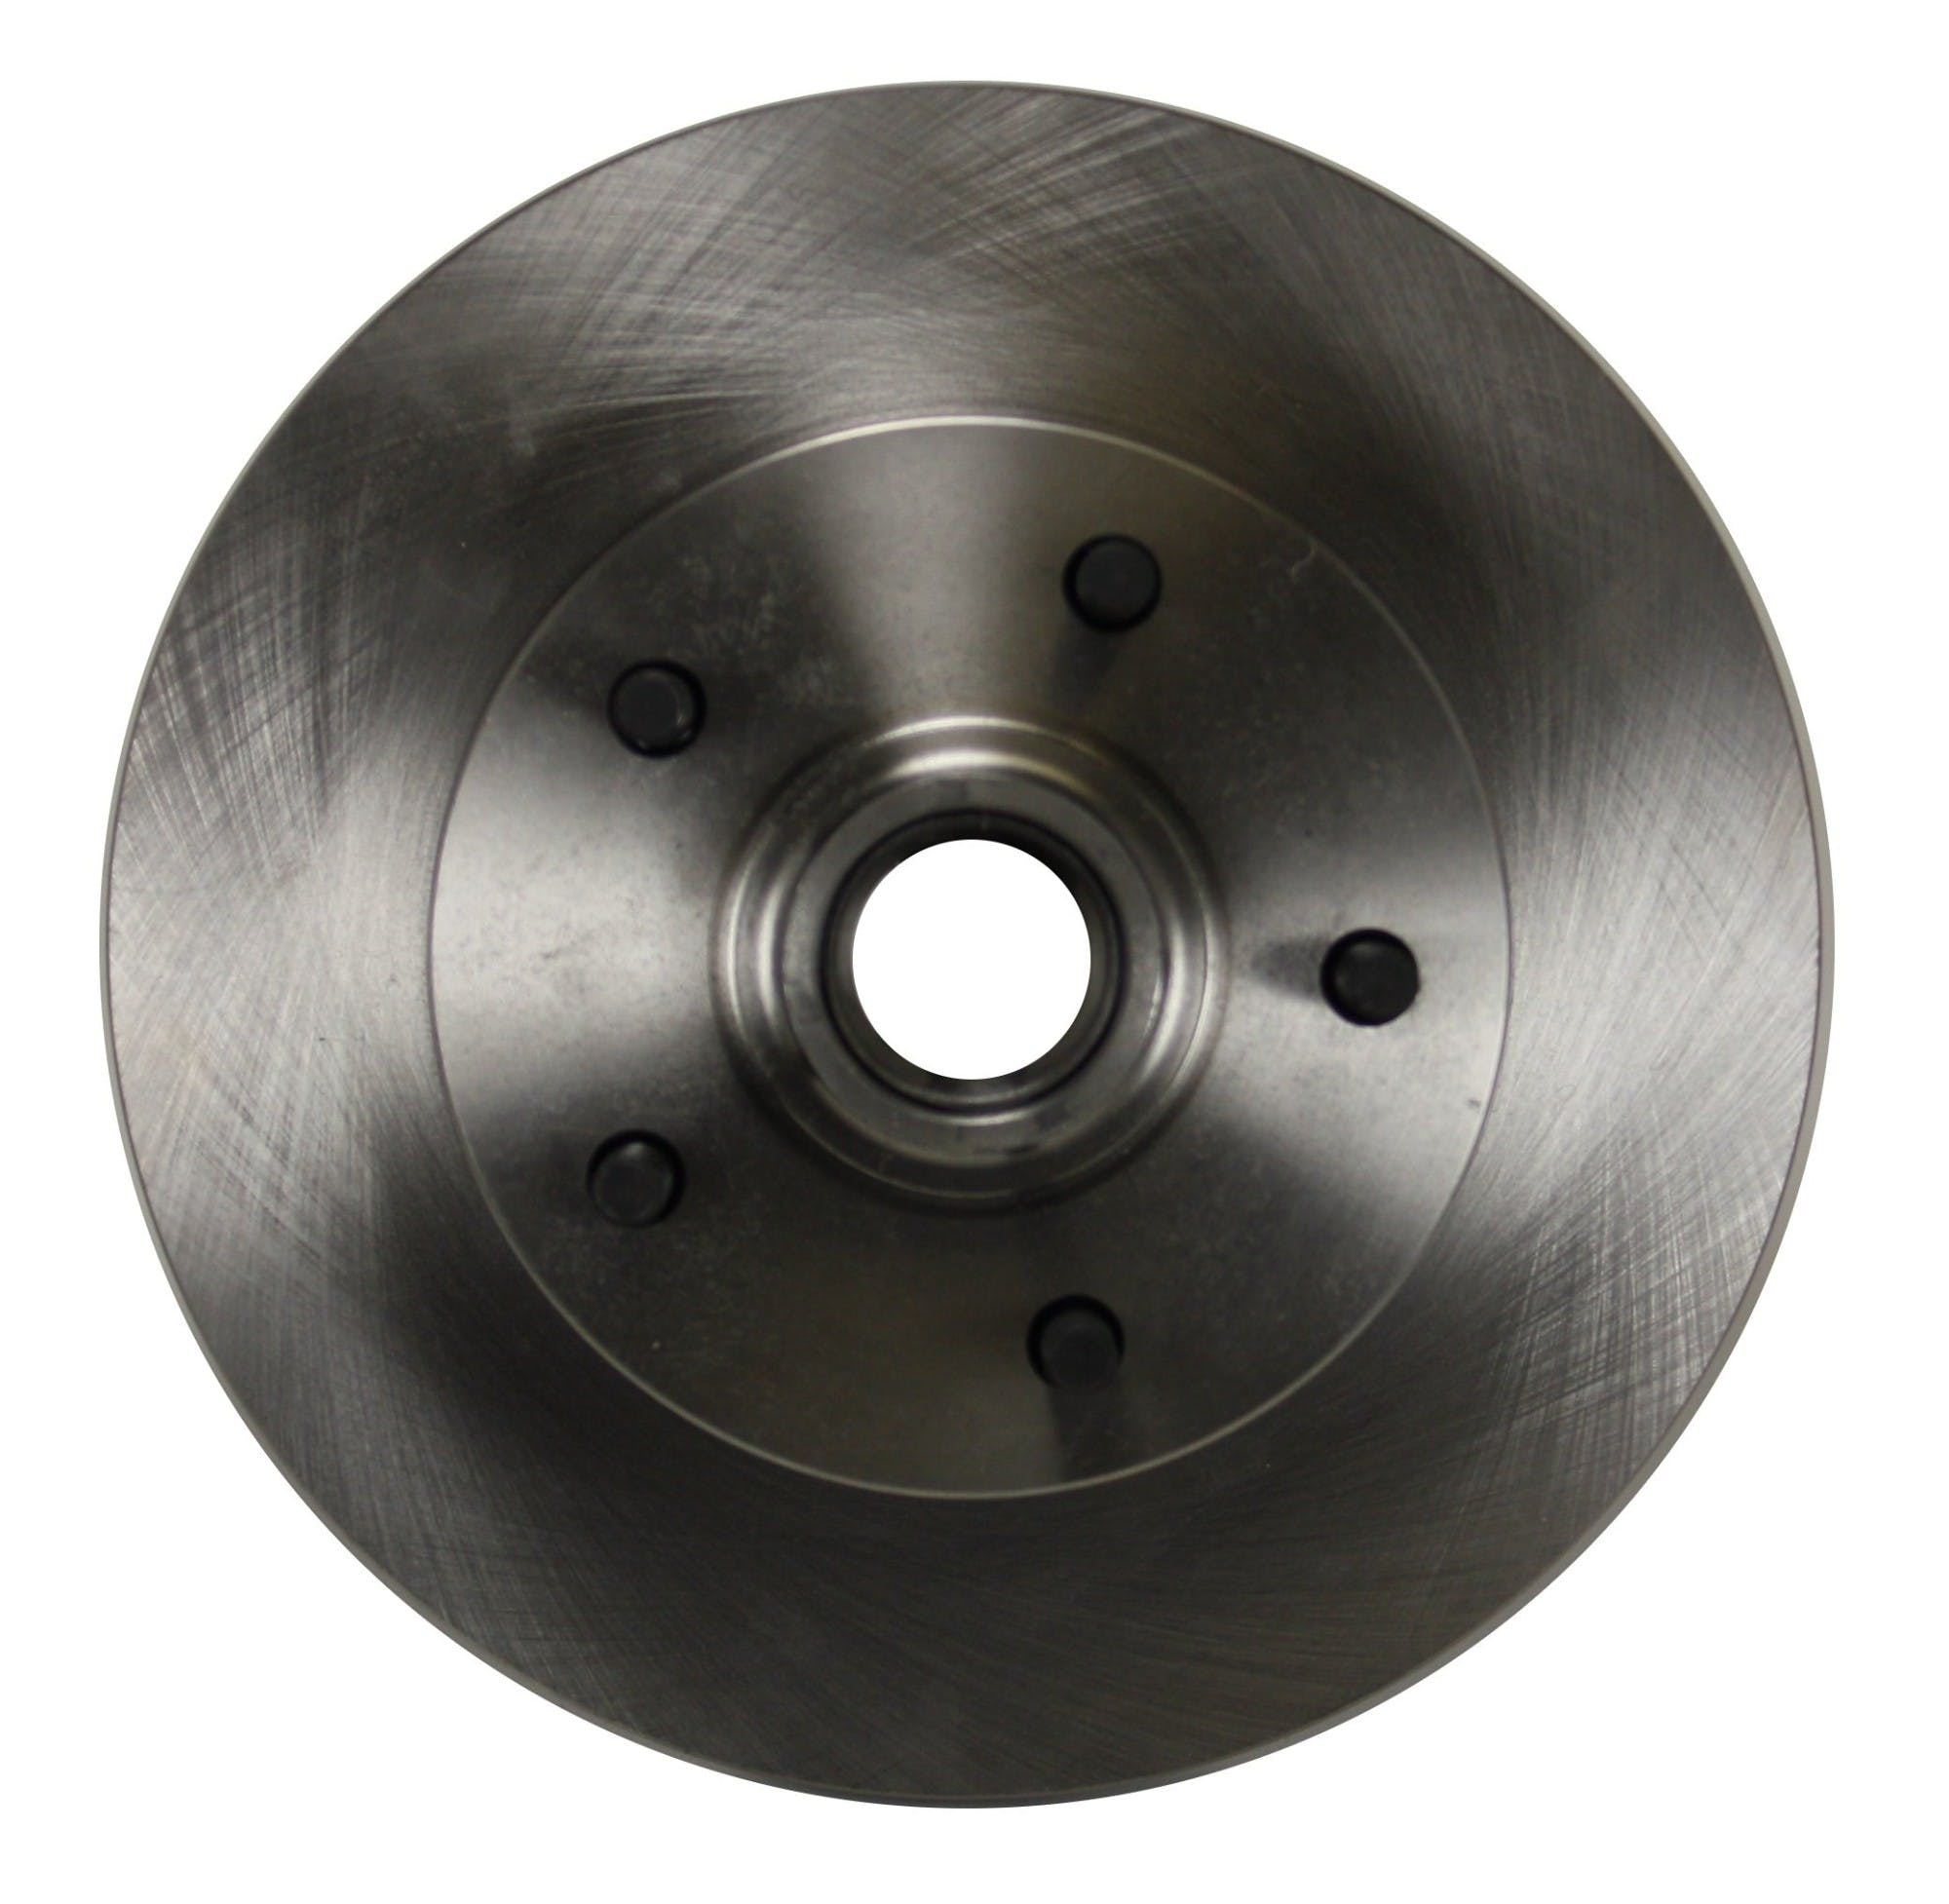 LEED Brakes FC1002-K1A3 Power Front Disc Kit - 7 in - Disc Disc - Zinc